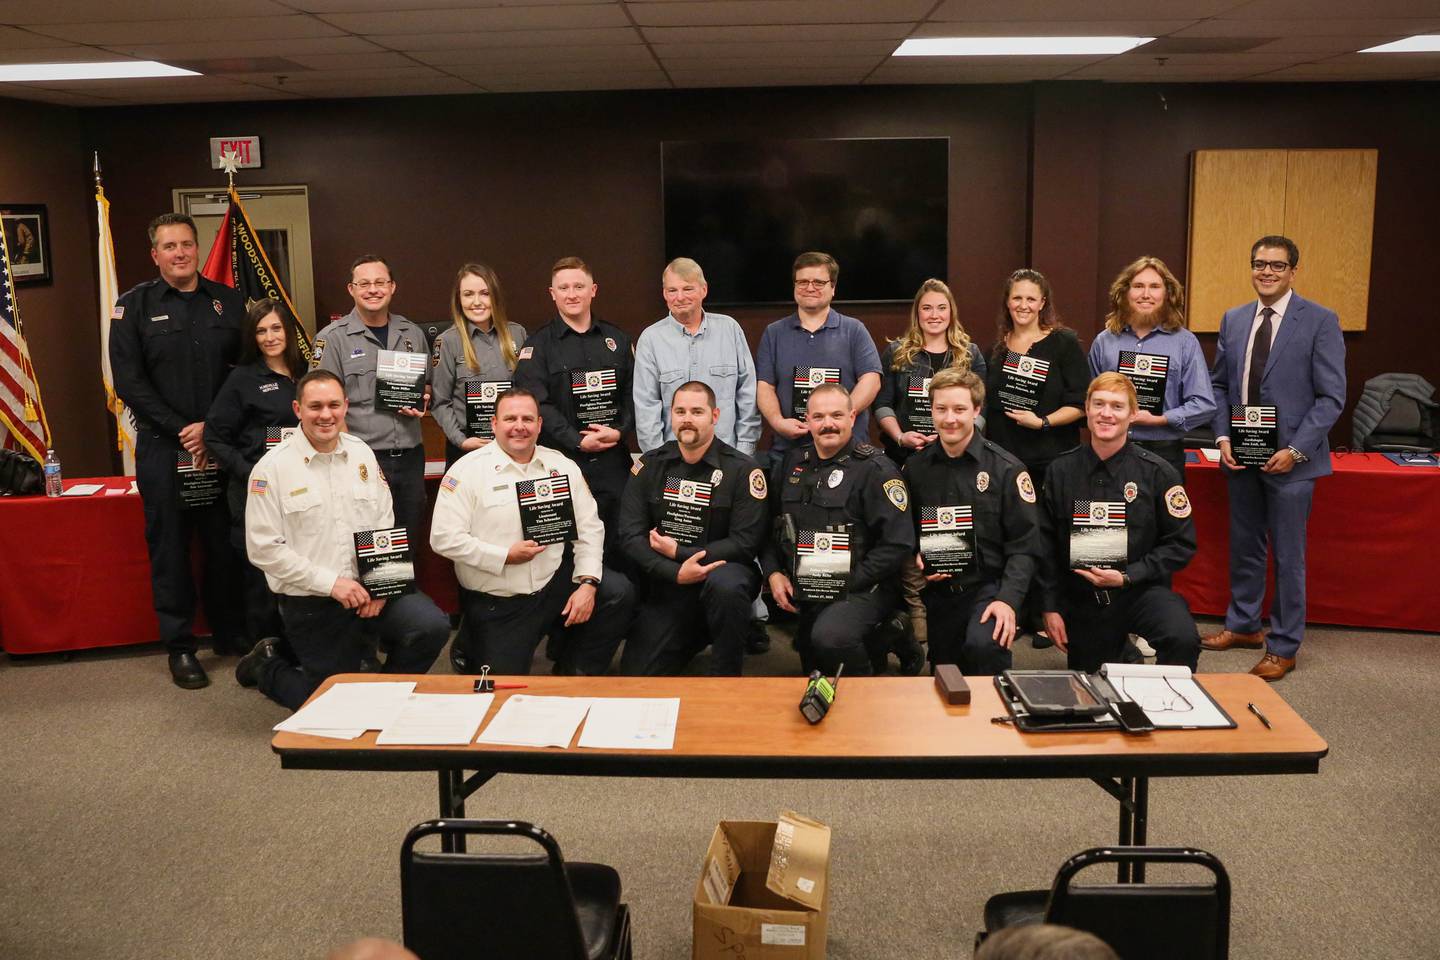 The Woodstock Fire/Rescue District recognized those who helped revive Charles Peterson, who suffered a heart attack in August, during their monthly board meeting Oct. 27. Awards were presented to WFRD Members, NERCOM 911 Telecommunicators, Woodstock Police Officer, Northwestern Medicine Cardiac Team and bystanders.